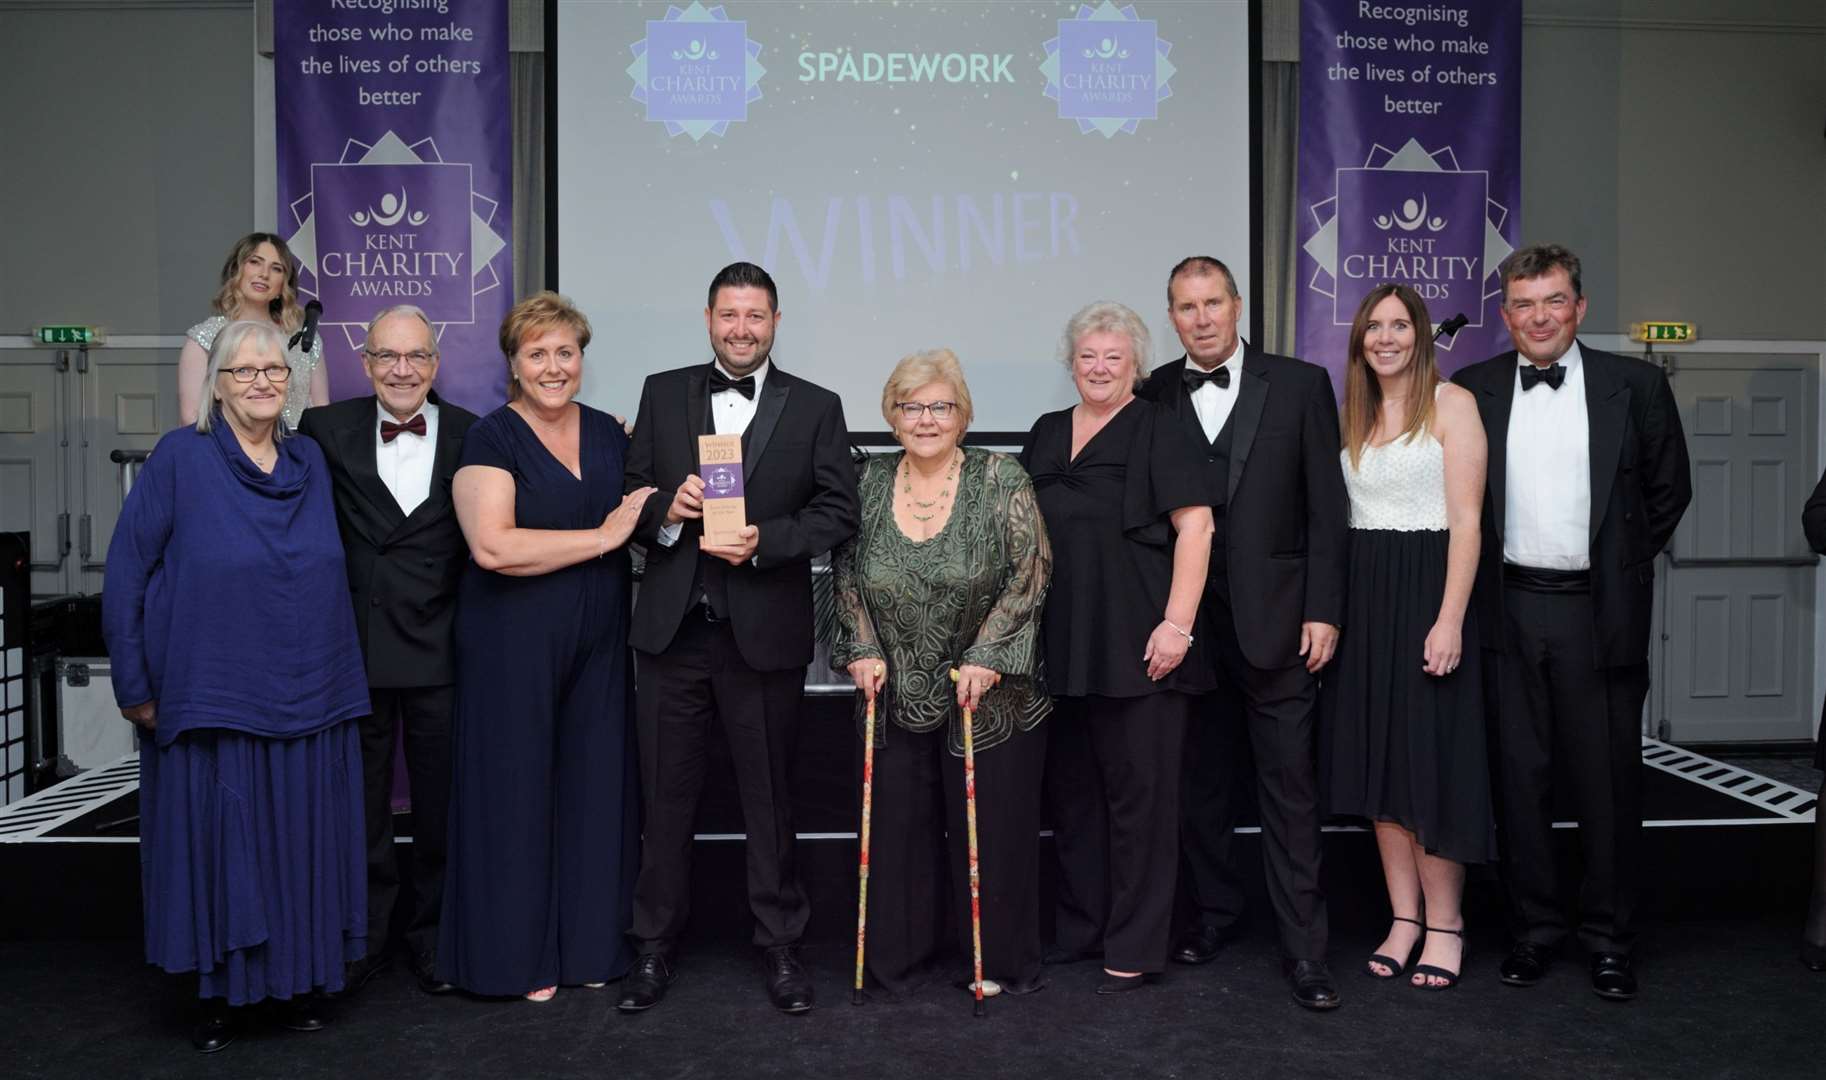 Last year’s winner, Spadework, helped launch this year’s Kent Charity Awards. Picture: Simon Hildrew